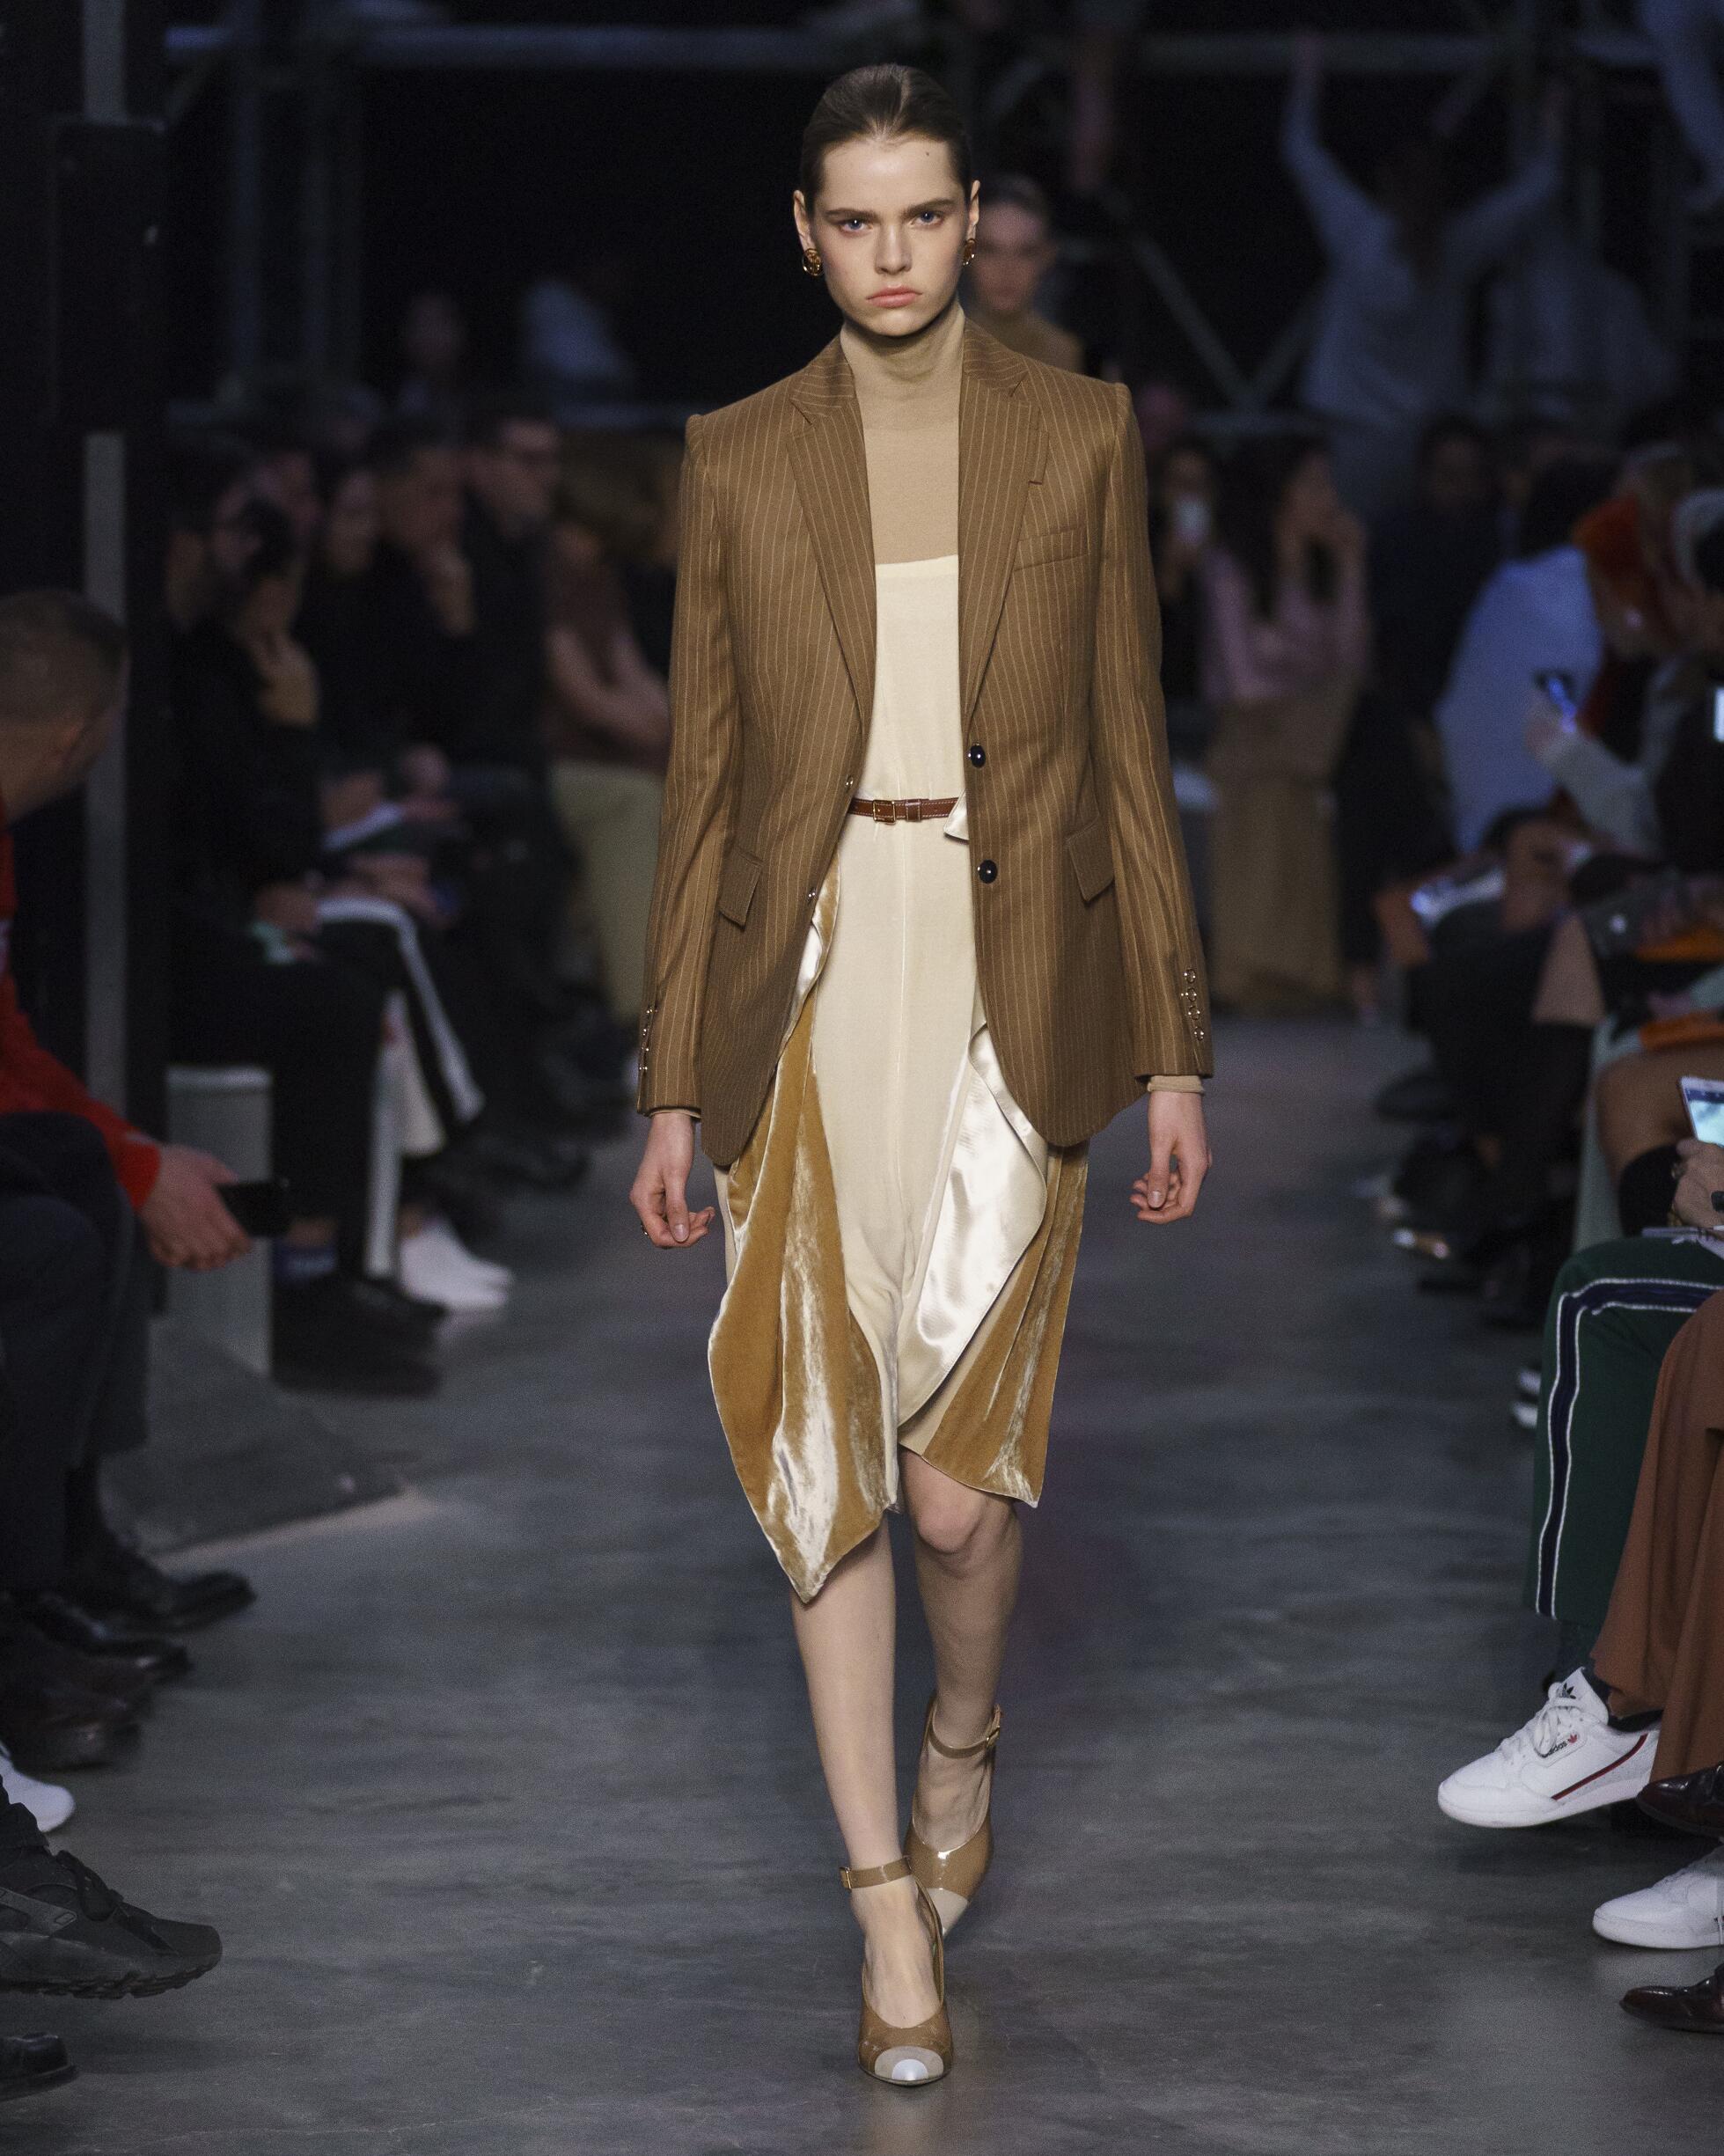 BURBERRY FALL WINTER 2019 COLLECTION | The Skinny Beep